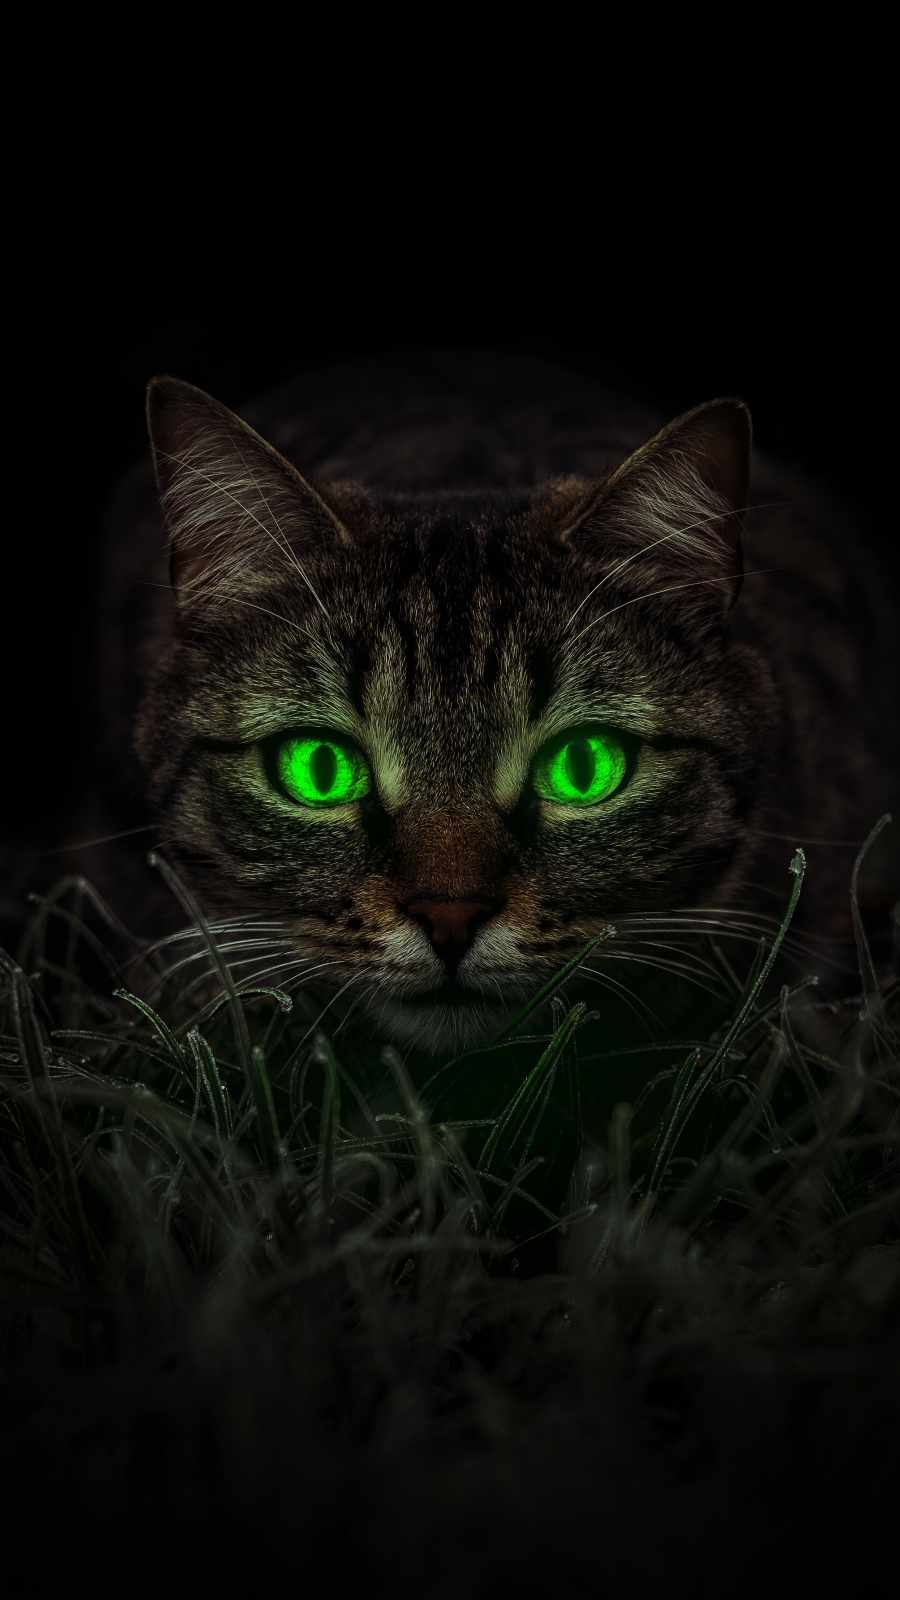 Cat Eyes IPhone Wallpaper - IPhone Wallpapers : iPhone Wallpapers